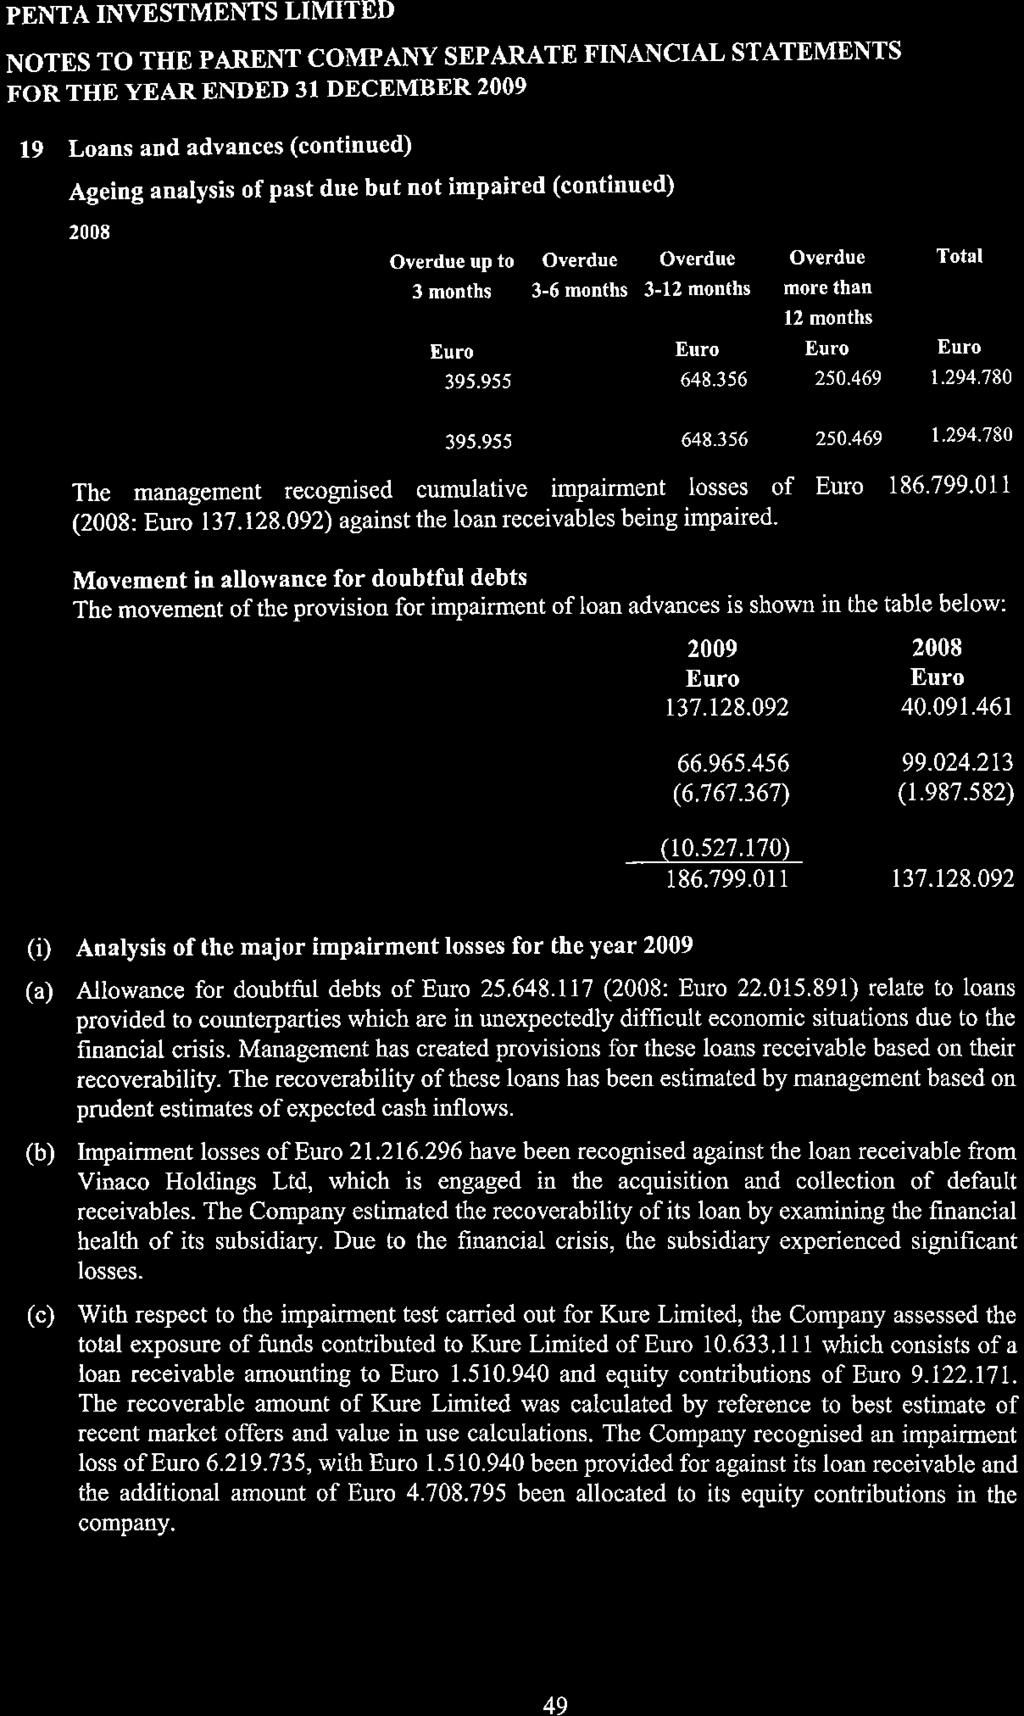 PENTA INVESTMENTS LIMITED NOTES TO THE PARENT COMPANY SEPARATE FINANCIAL STATEMENTS FOR THE YEAR ENDED 31 DECEMBER 2OO9 19 s and advances (continued) (i) Ageing analysis of past due but not impaired